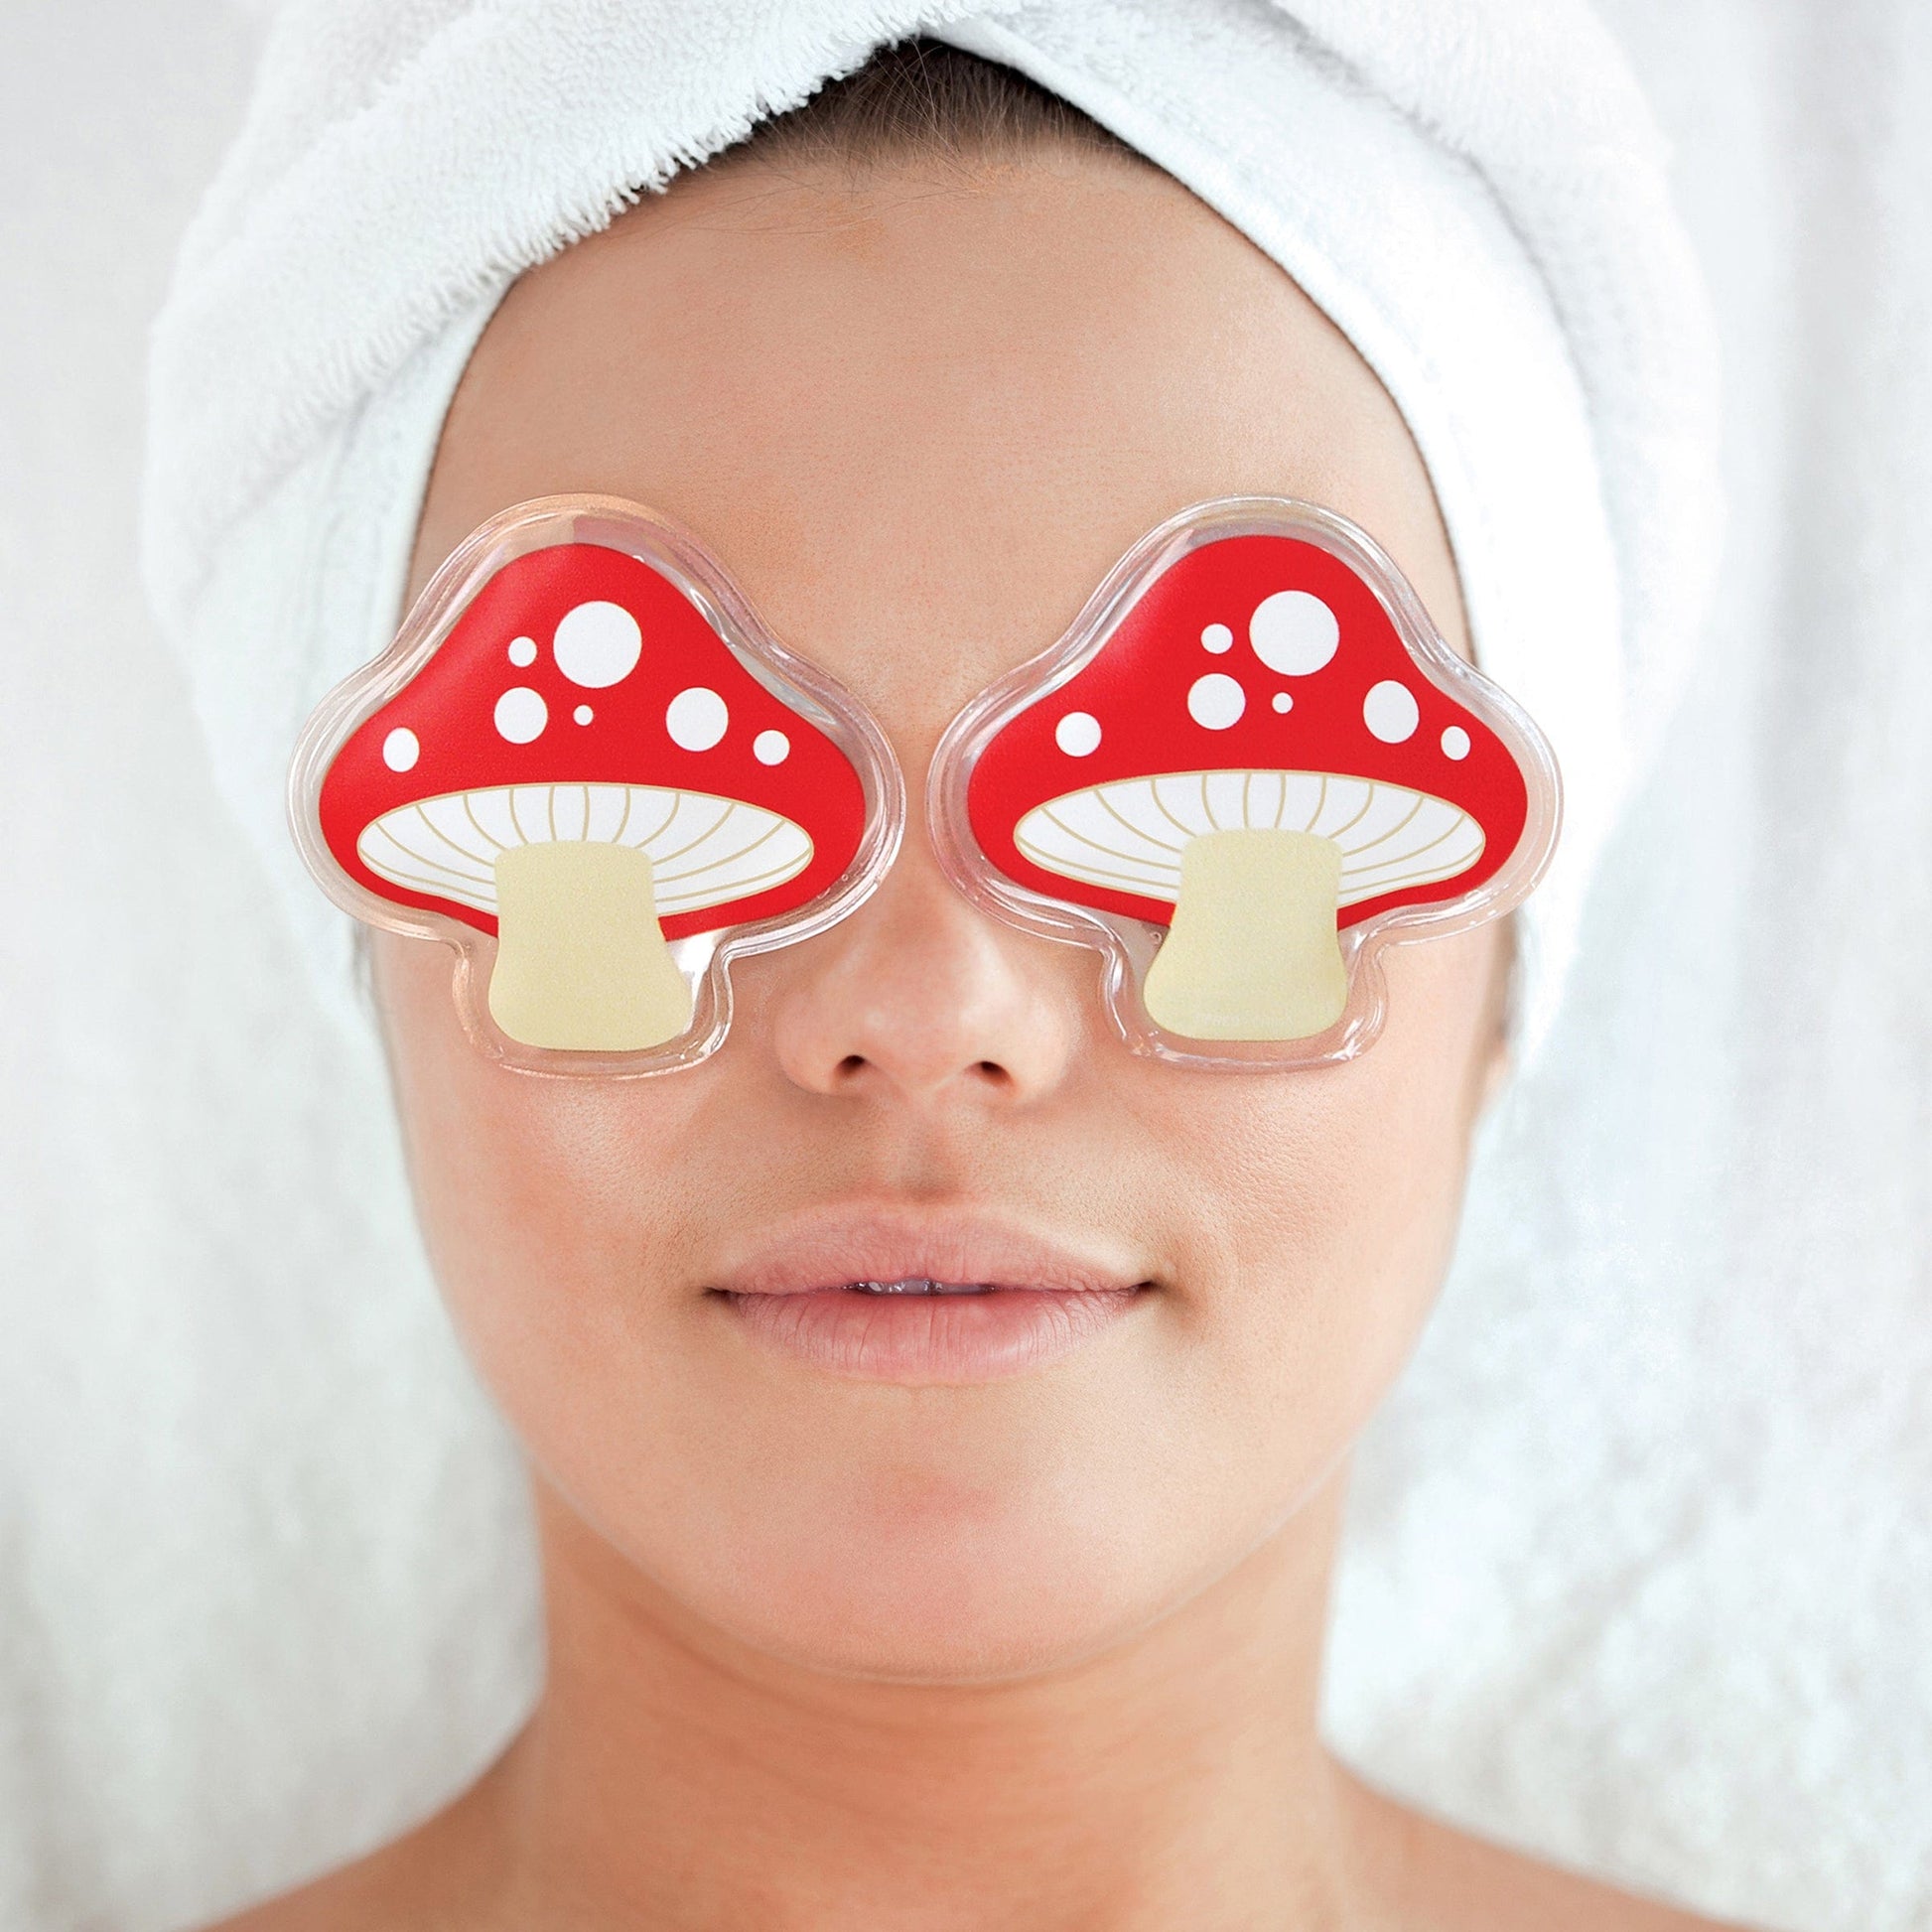 eye pads in the shape of mushrooms with red tops and white dots laying on a face with hair wrapped in towel